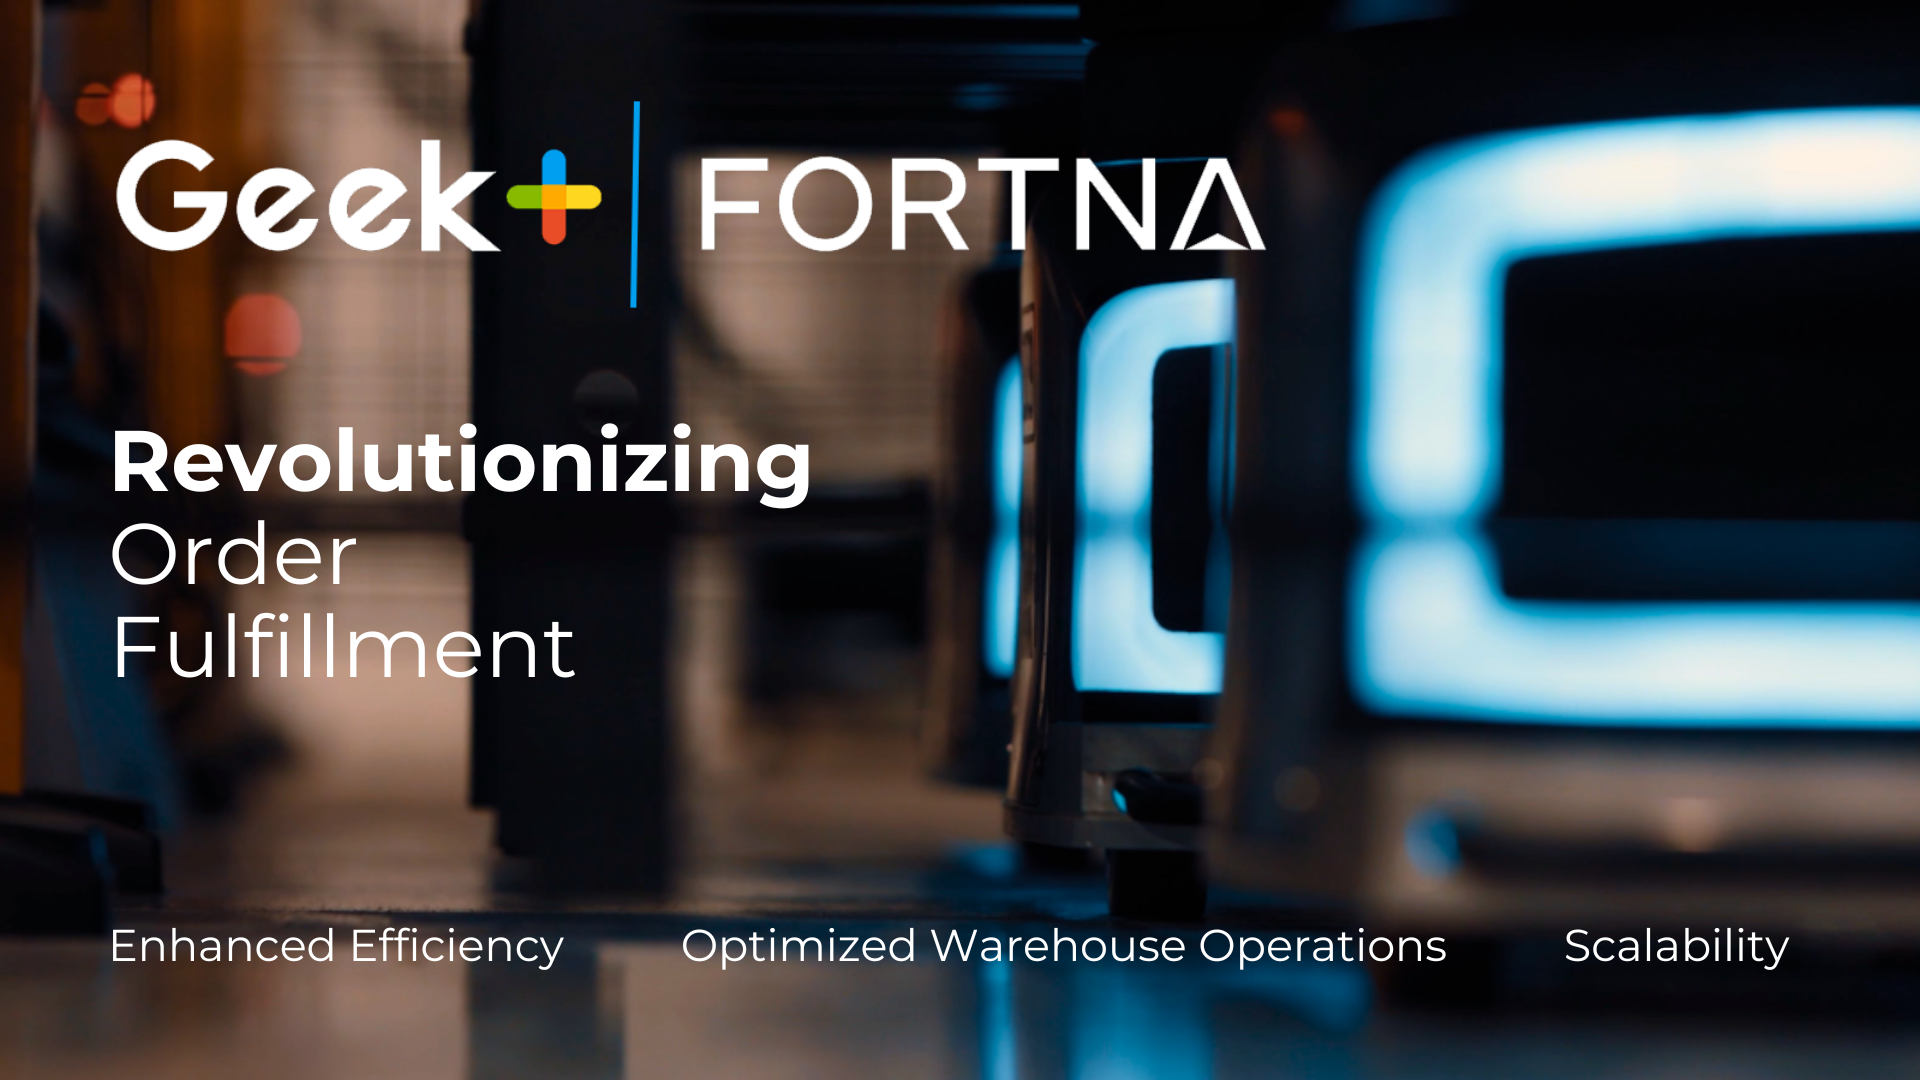 FORTNA and Geek+ Revolutionizing Order Fulfillment with Automated Robotics Solutions